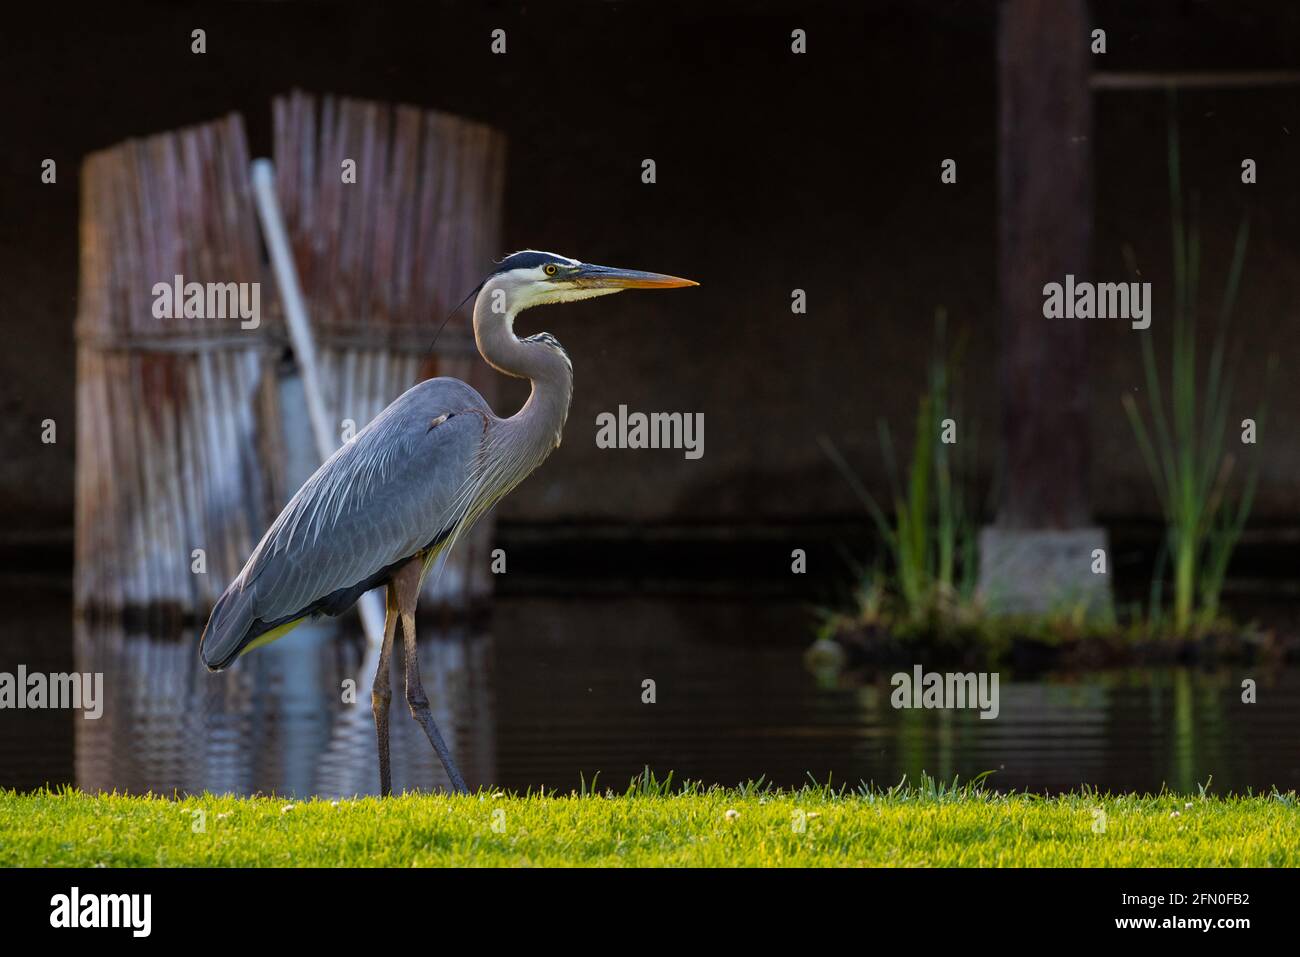 Blue Heron by a pond Stock Photo